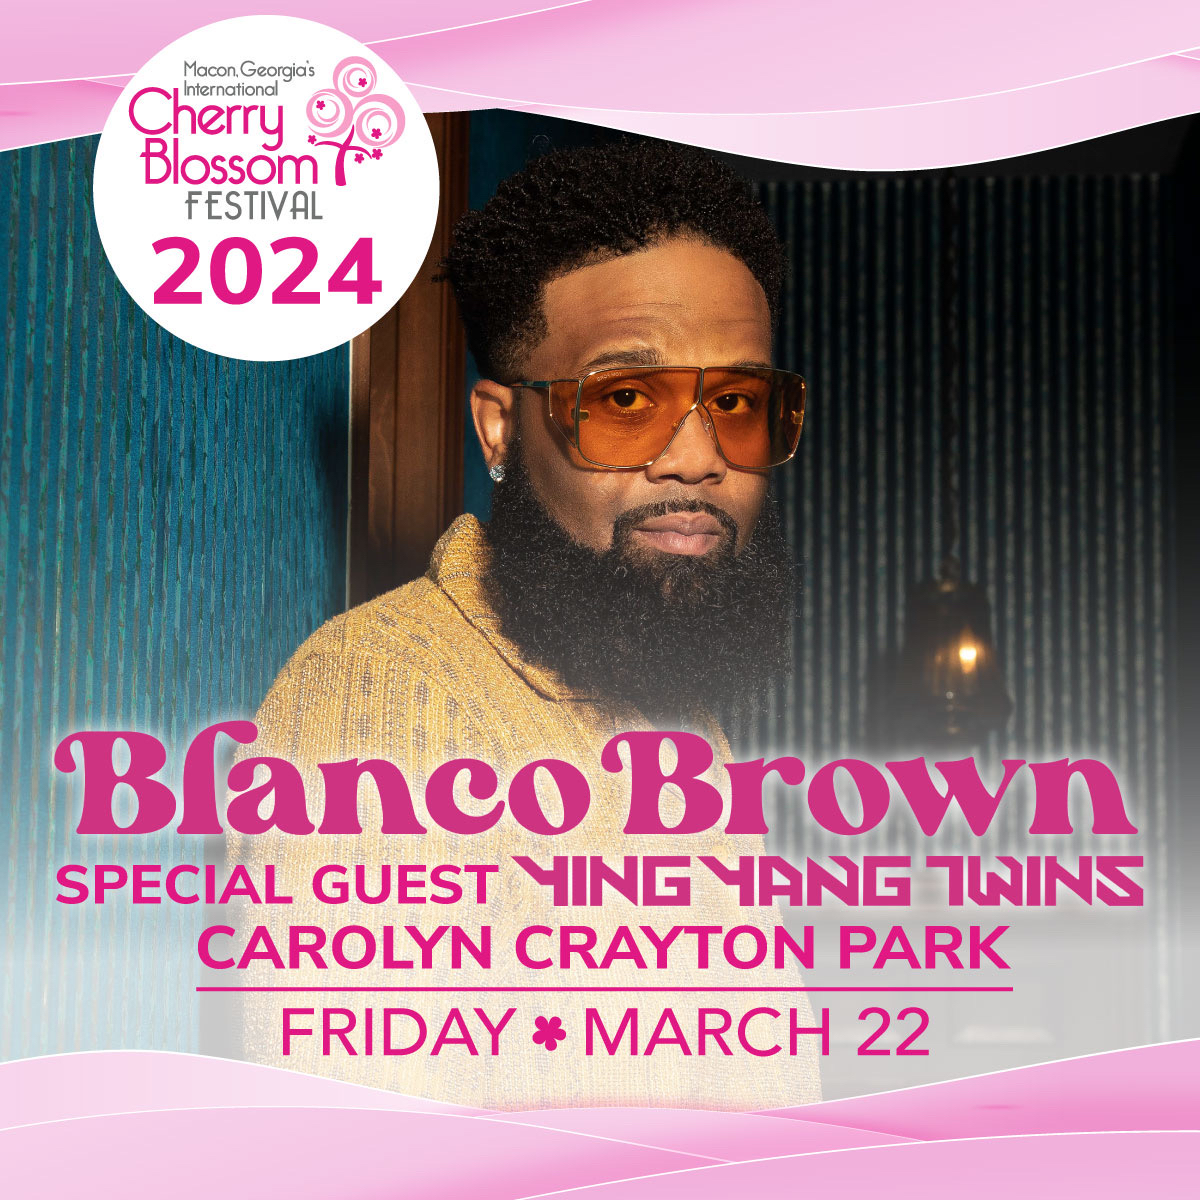 Cherry Blossom Announces Blanco Brown with Special Guests The Ying Yang Twins at 2024 Festival post thumbnail